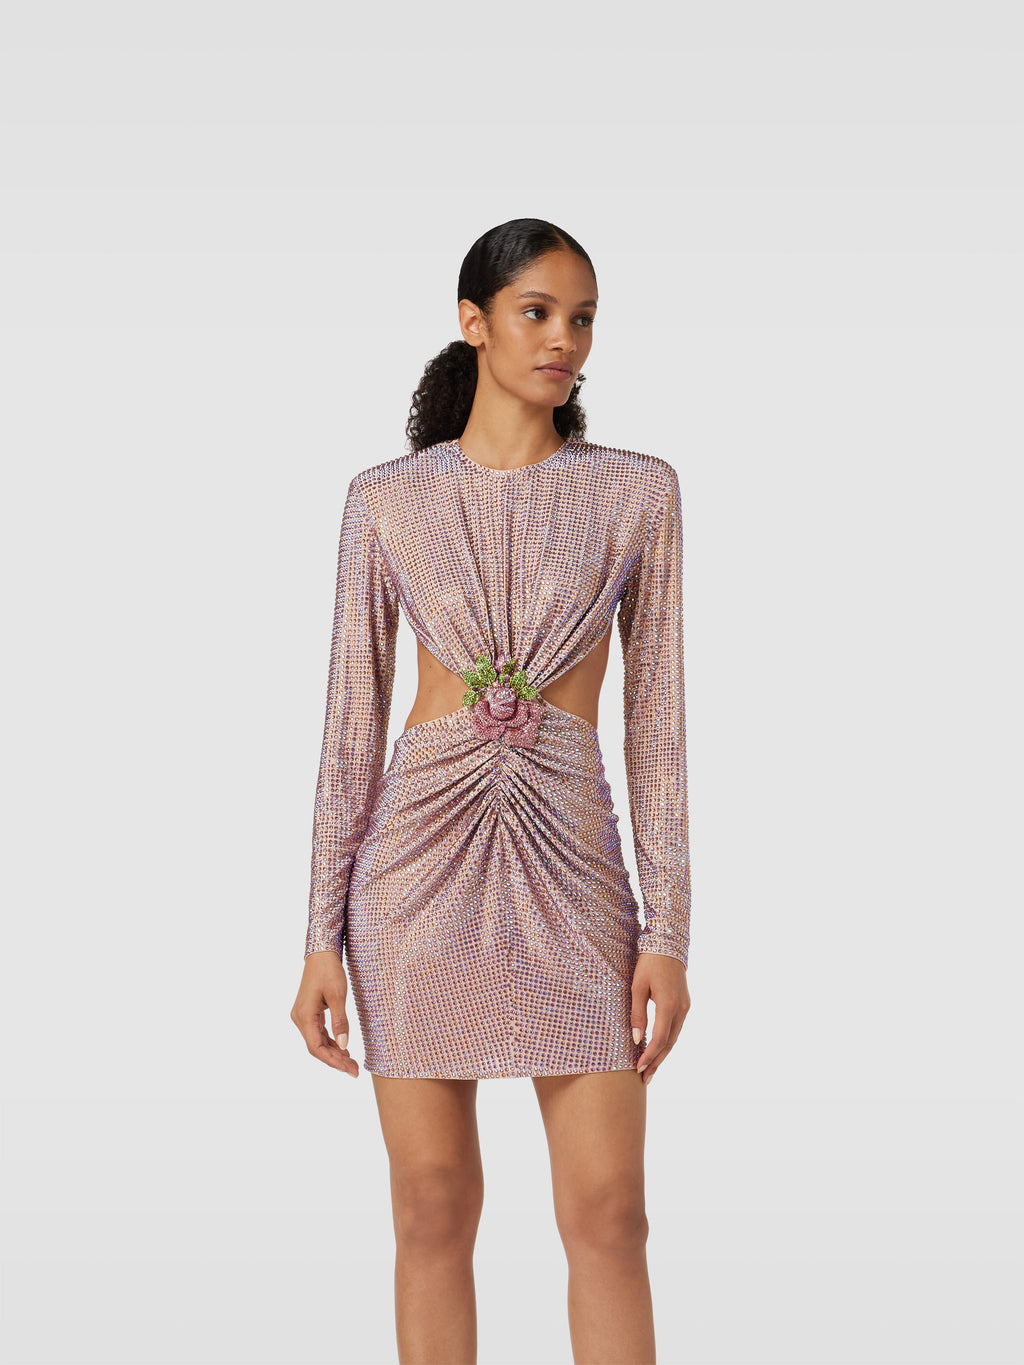 Feel like a glamorous queen in our Robe Irie! This elegant and chic rosa vestido is adorned with shimmering cristales, giving you a mesmerizing glow. Add a touch of luxury to your wardrobe and turn heads wherever you go. Elevate your style game with the Robe Irie.